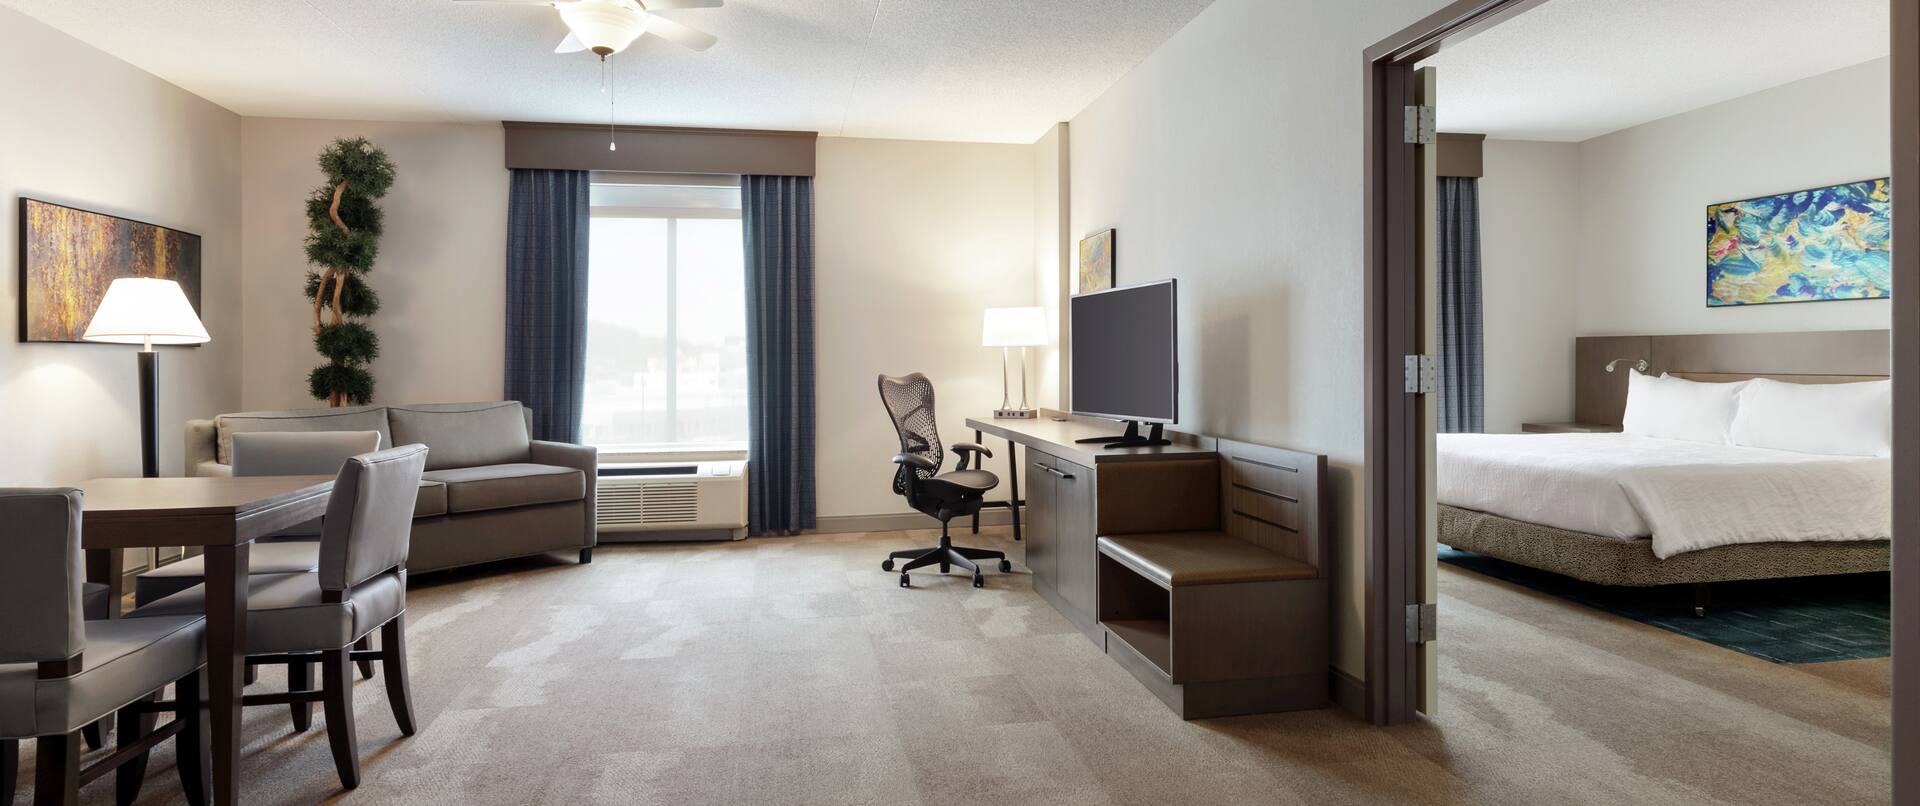 King Suite with Bed, Lounge Area, Work Desk, Room Technology, and Dining Area